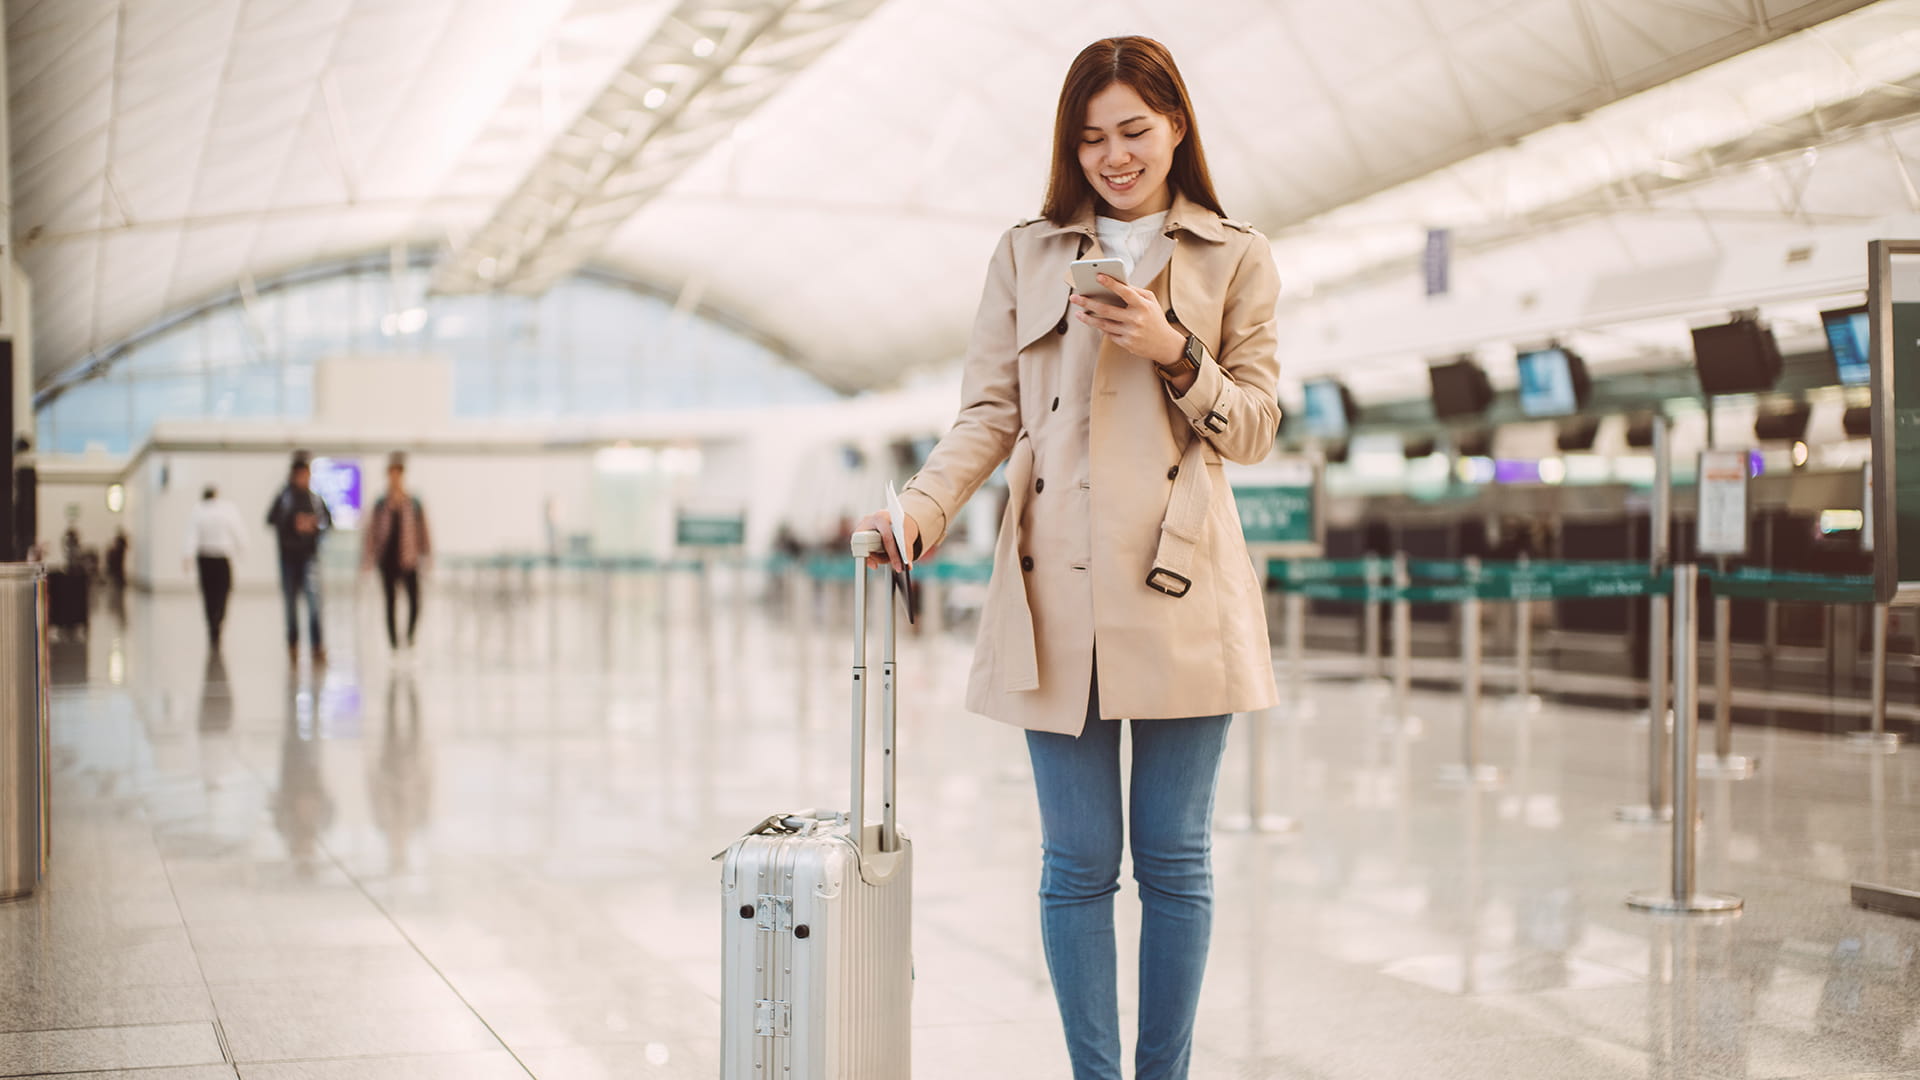 A smiling woman looks at her smartphone while in an airport.